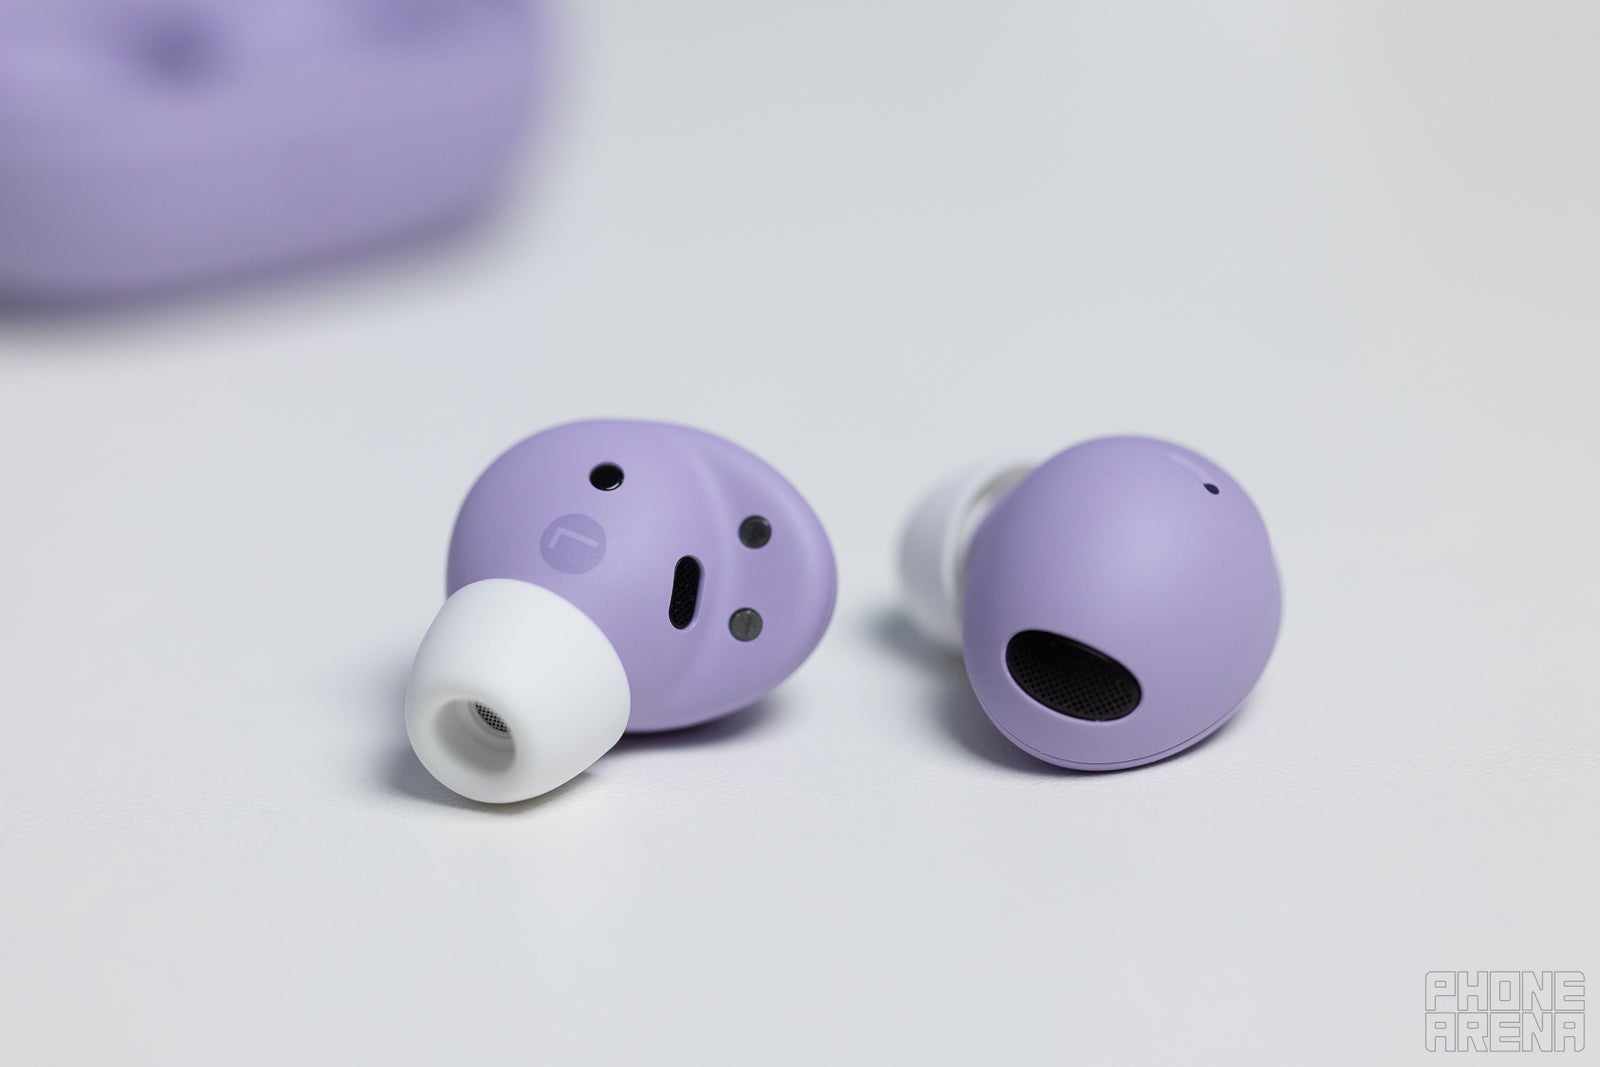 Samsung Galaxy Buds 2 Pro review: Are these $229 earbuds worth it